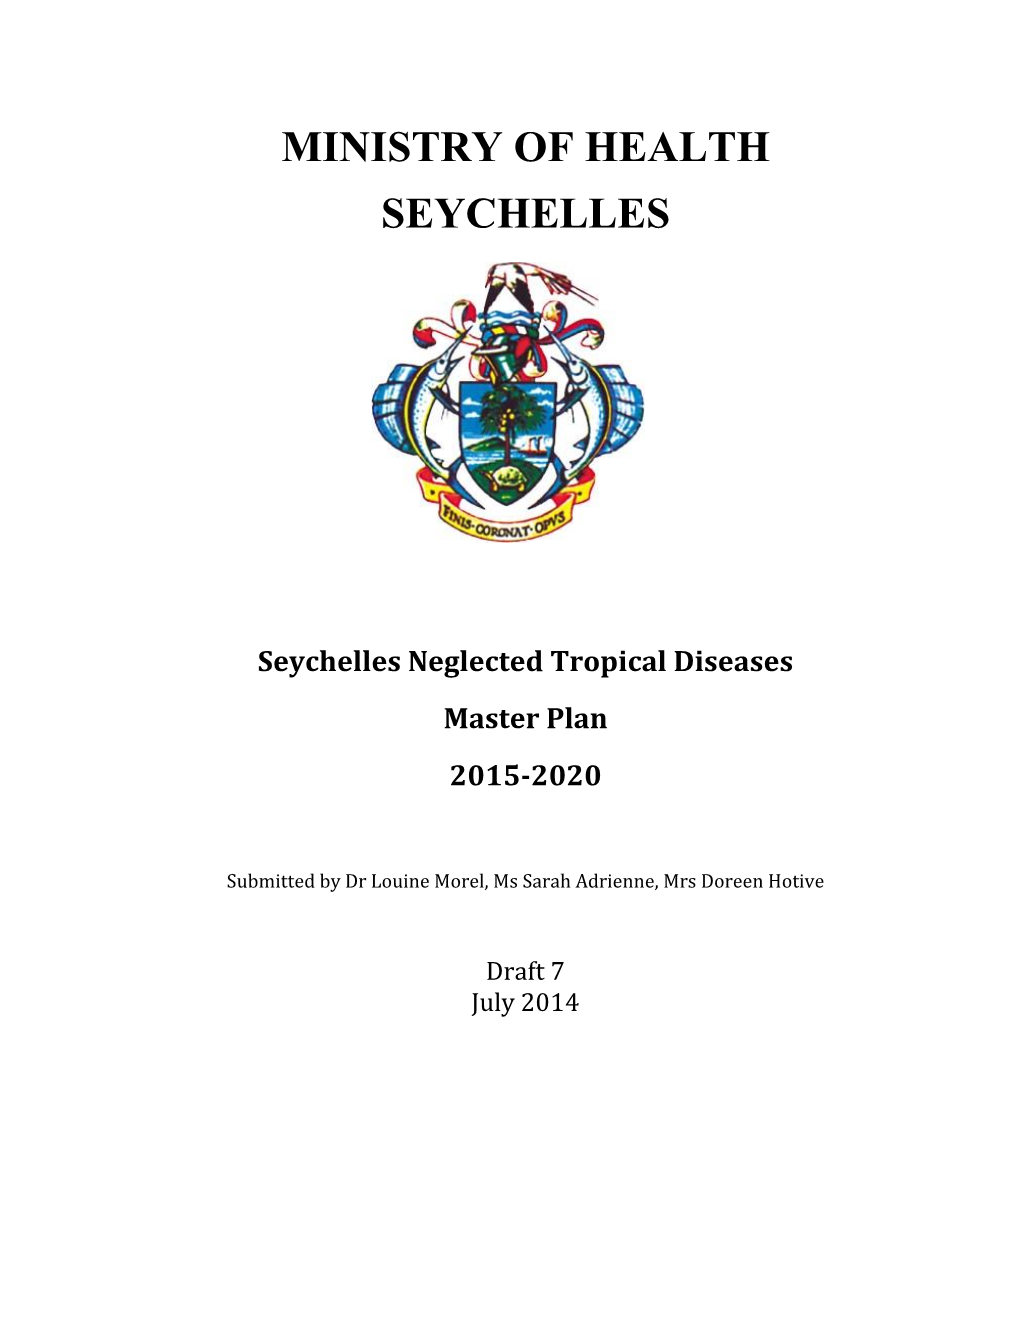 Ministry of Health Seychelles